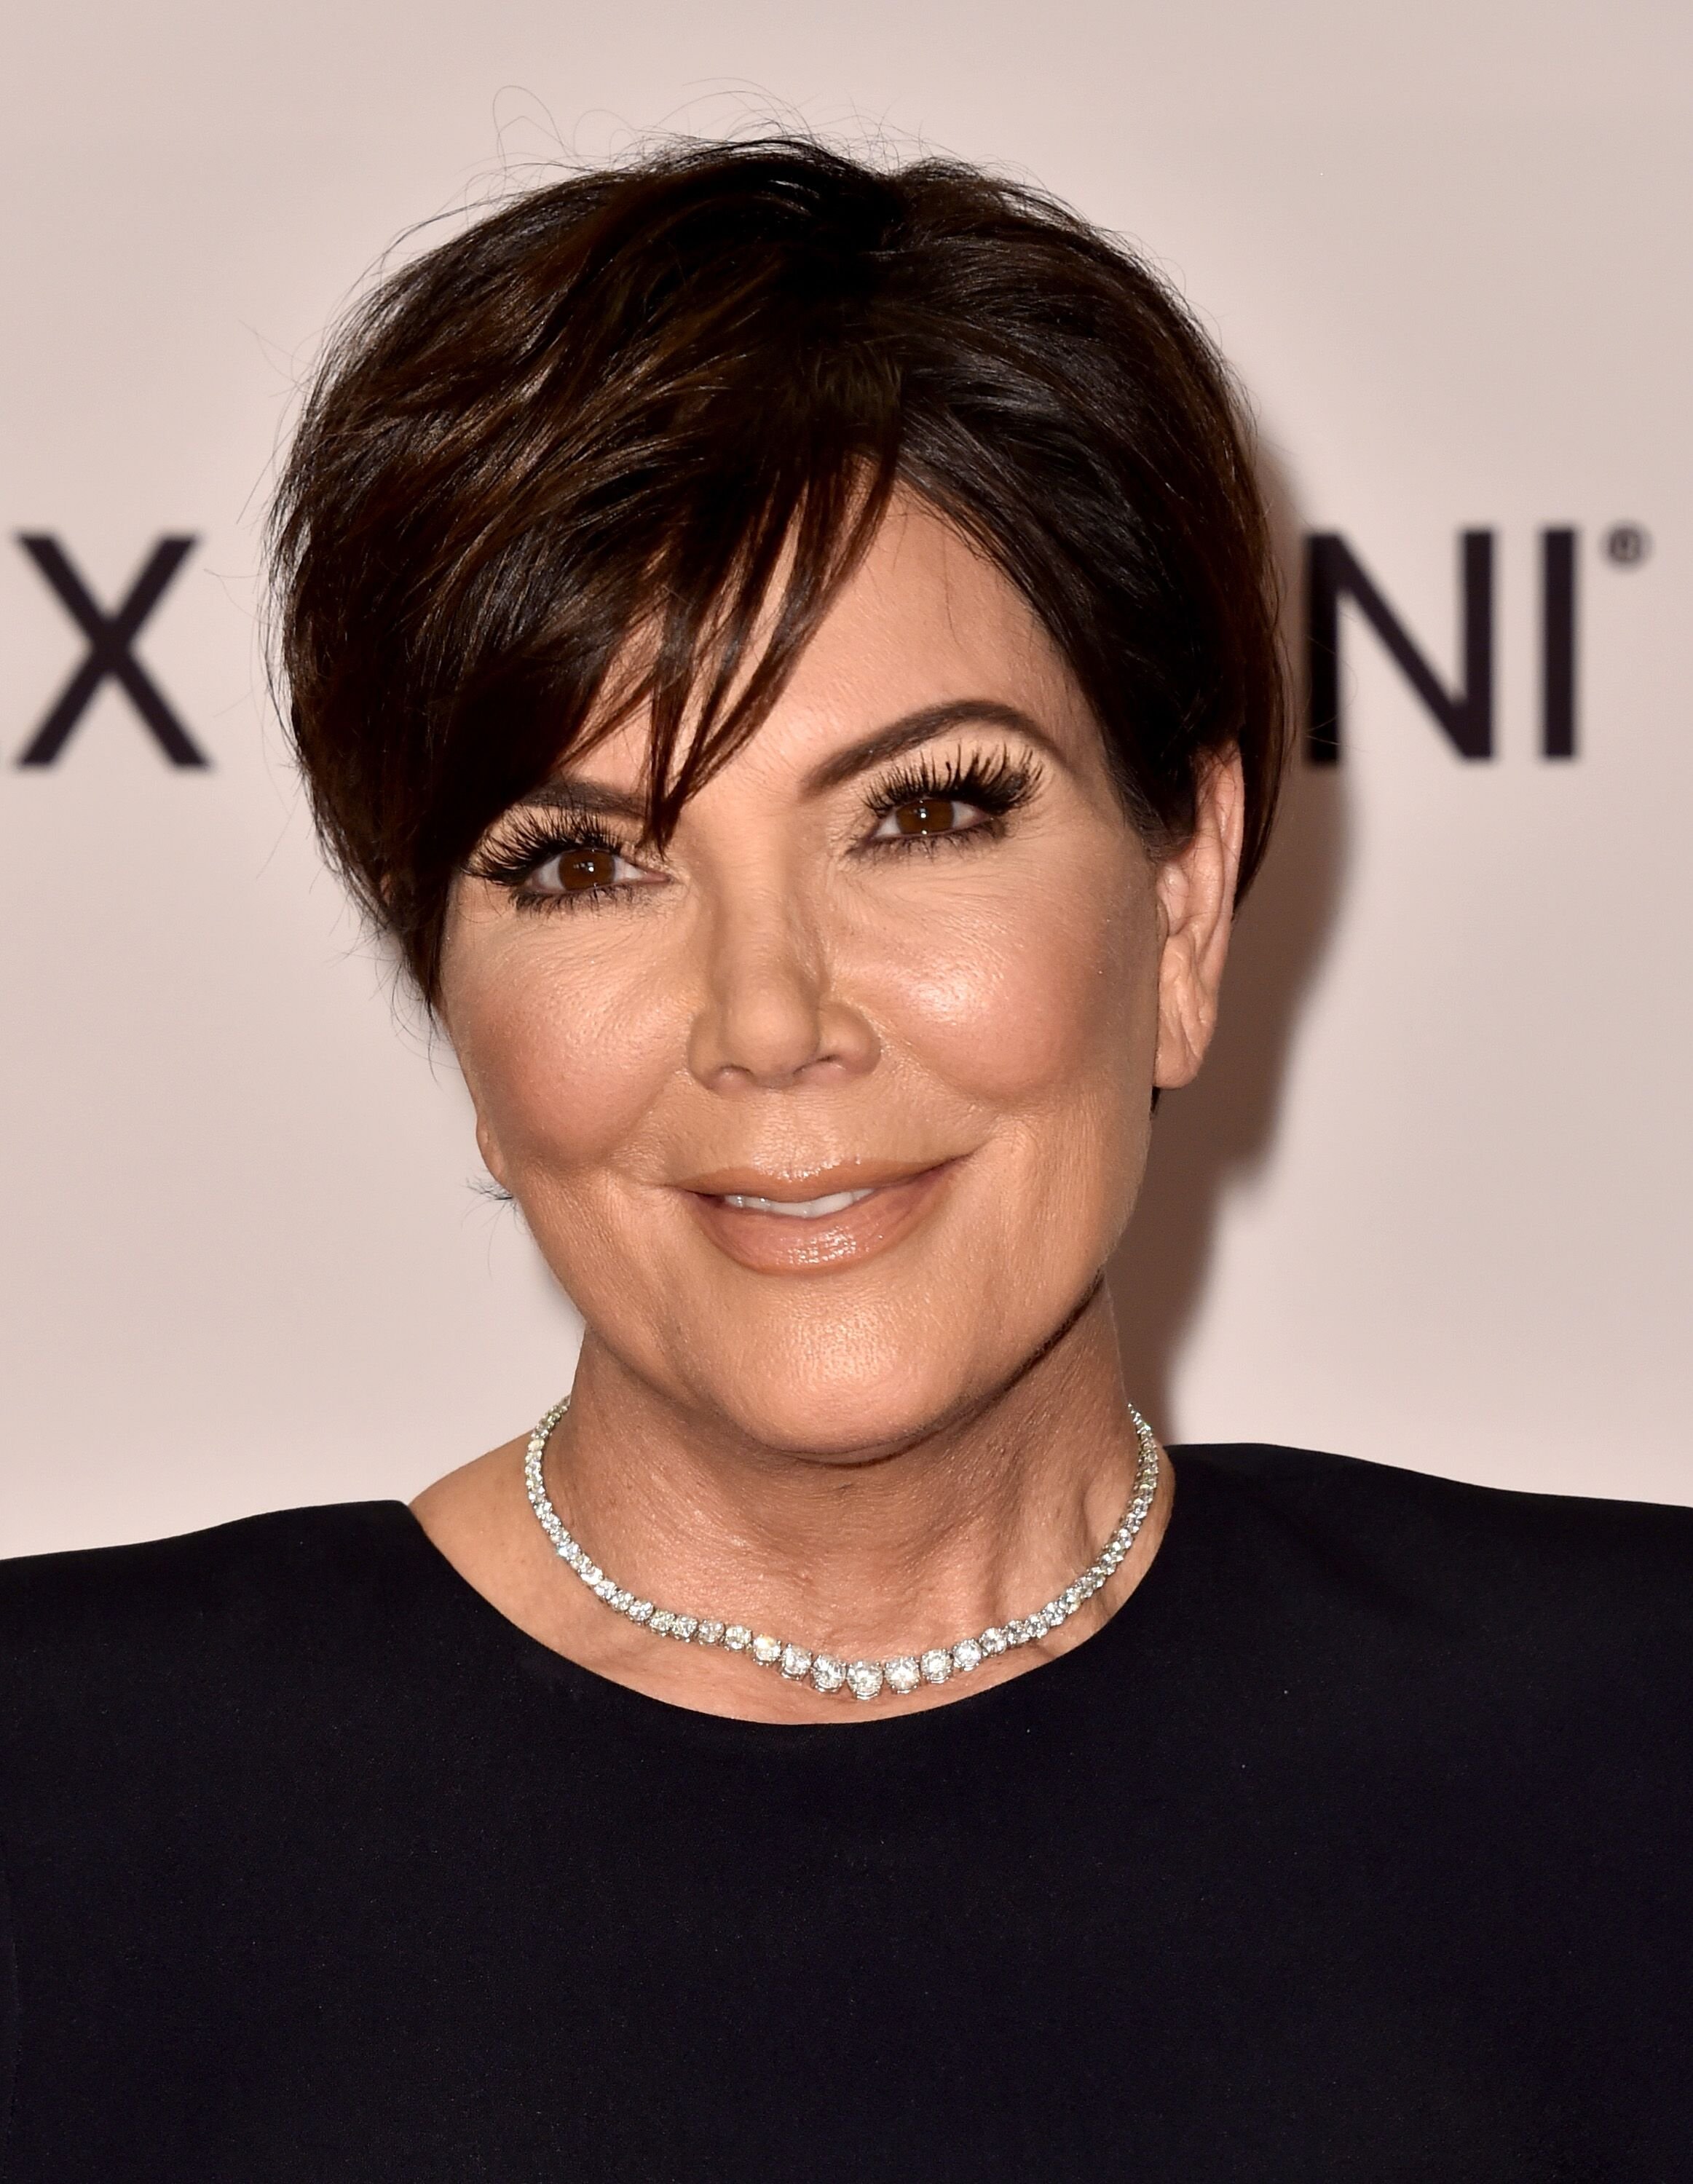 Kris Jenner attends the 24th Annual Race To Erase MS Gala at The Beverly Hilton Hotel on May 5, 2017 in Beverly Hills, California. | Photo: Getty Images